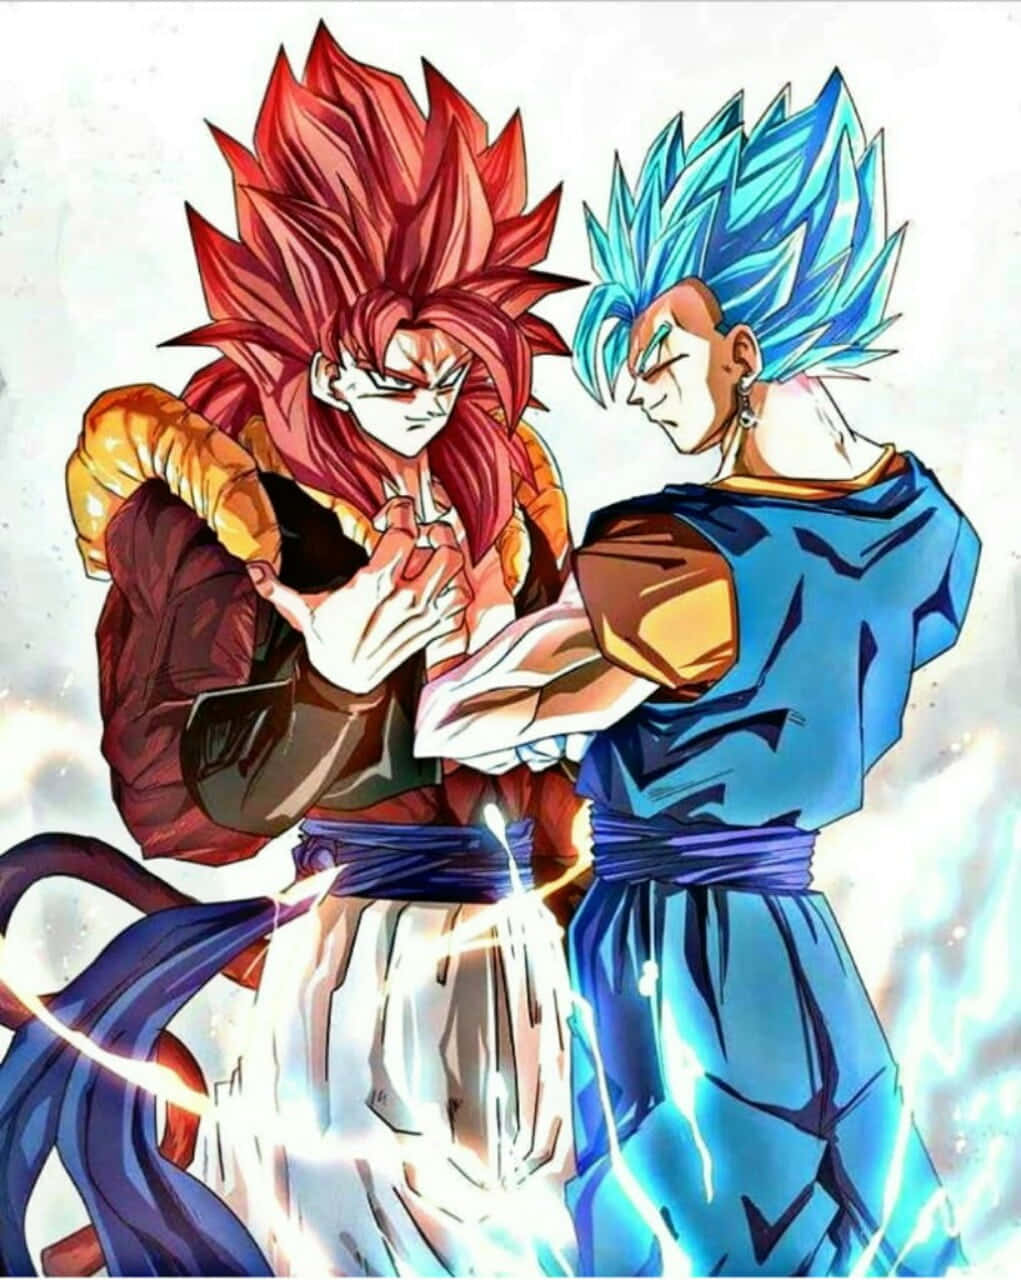 "The Legendary Fused Saiyans Gogeta and Vegito, Ready to Take on Any Challenger" Wallpaper